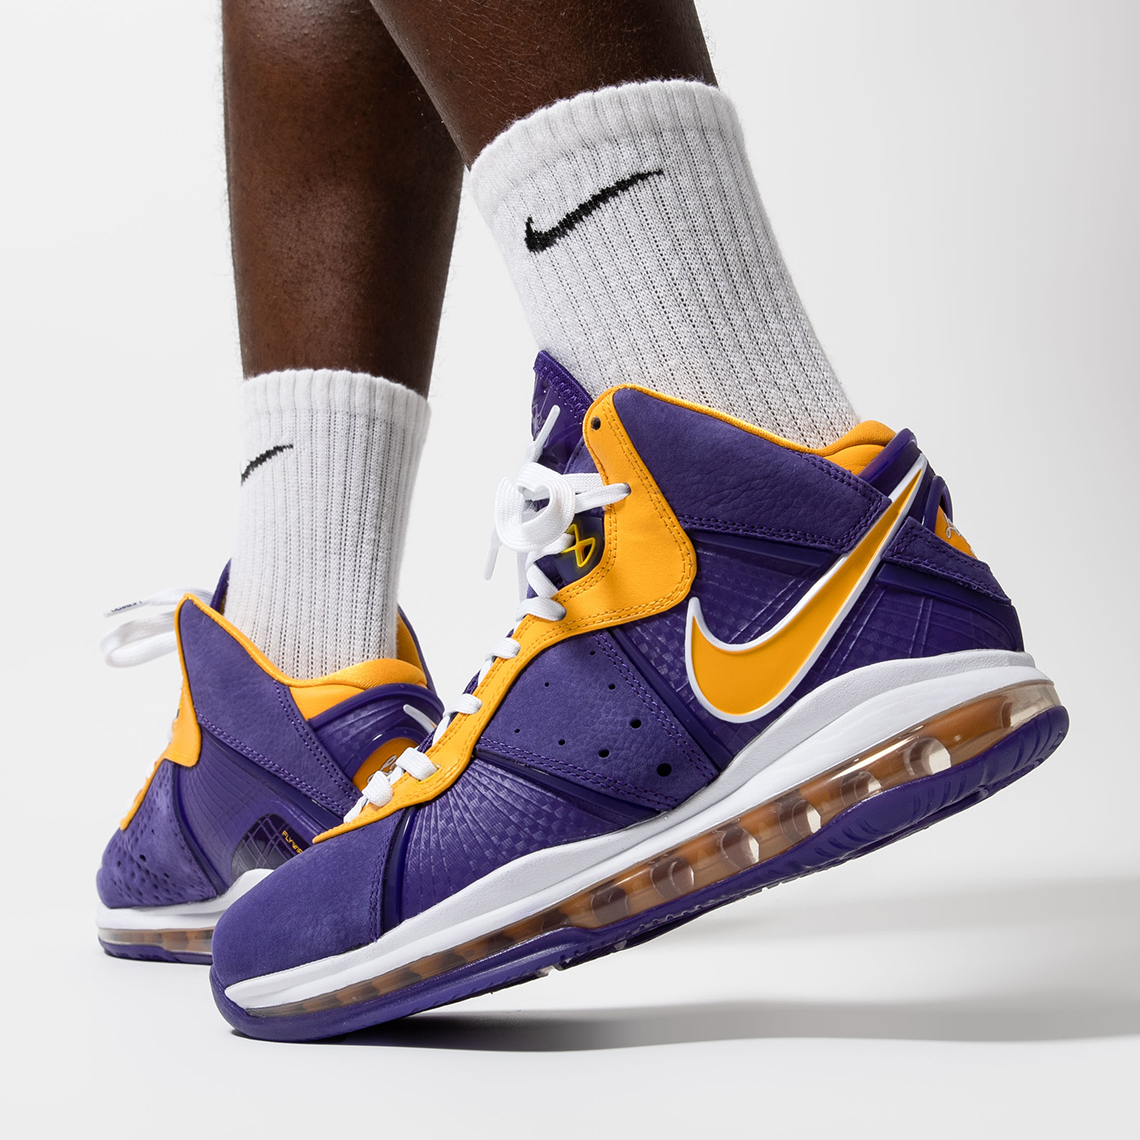 Hold The Christmas List! Nike's LeBron 8 'Lakers' Sneaker Are